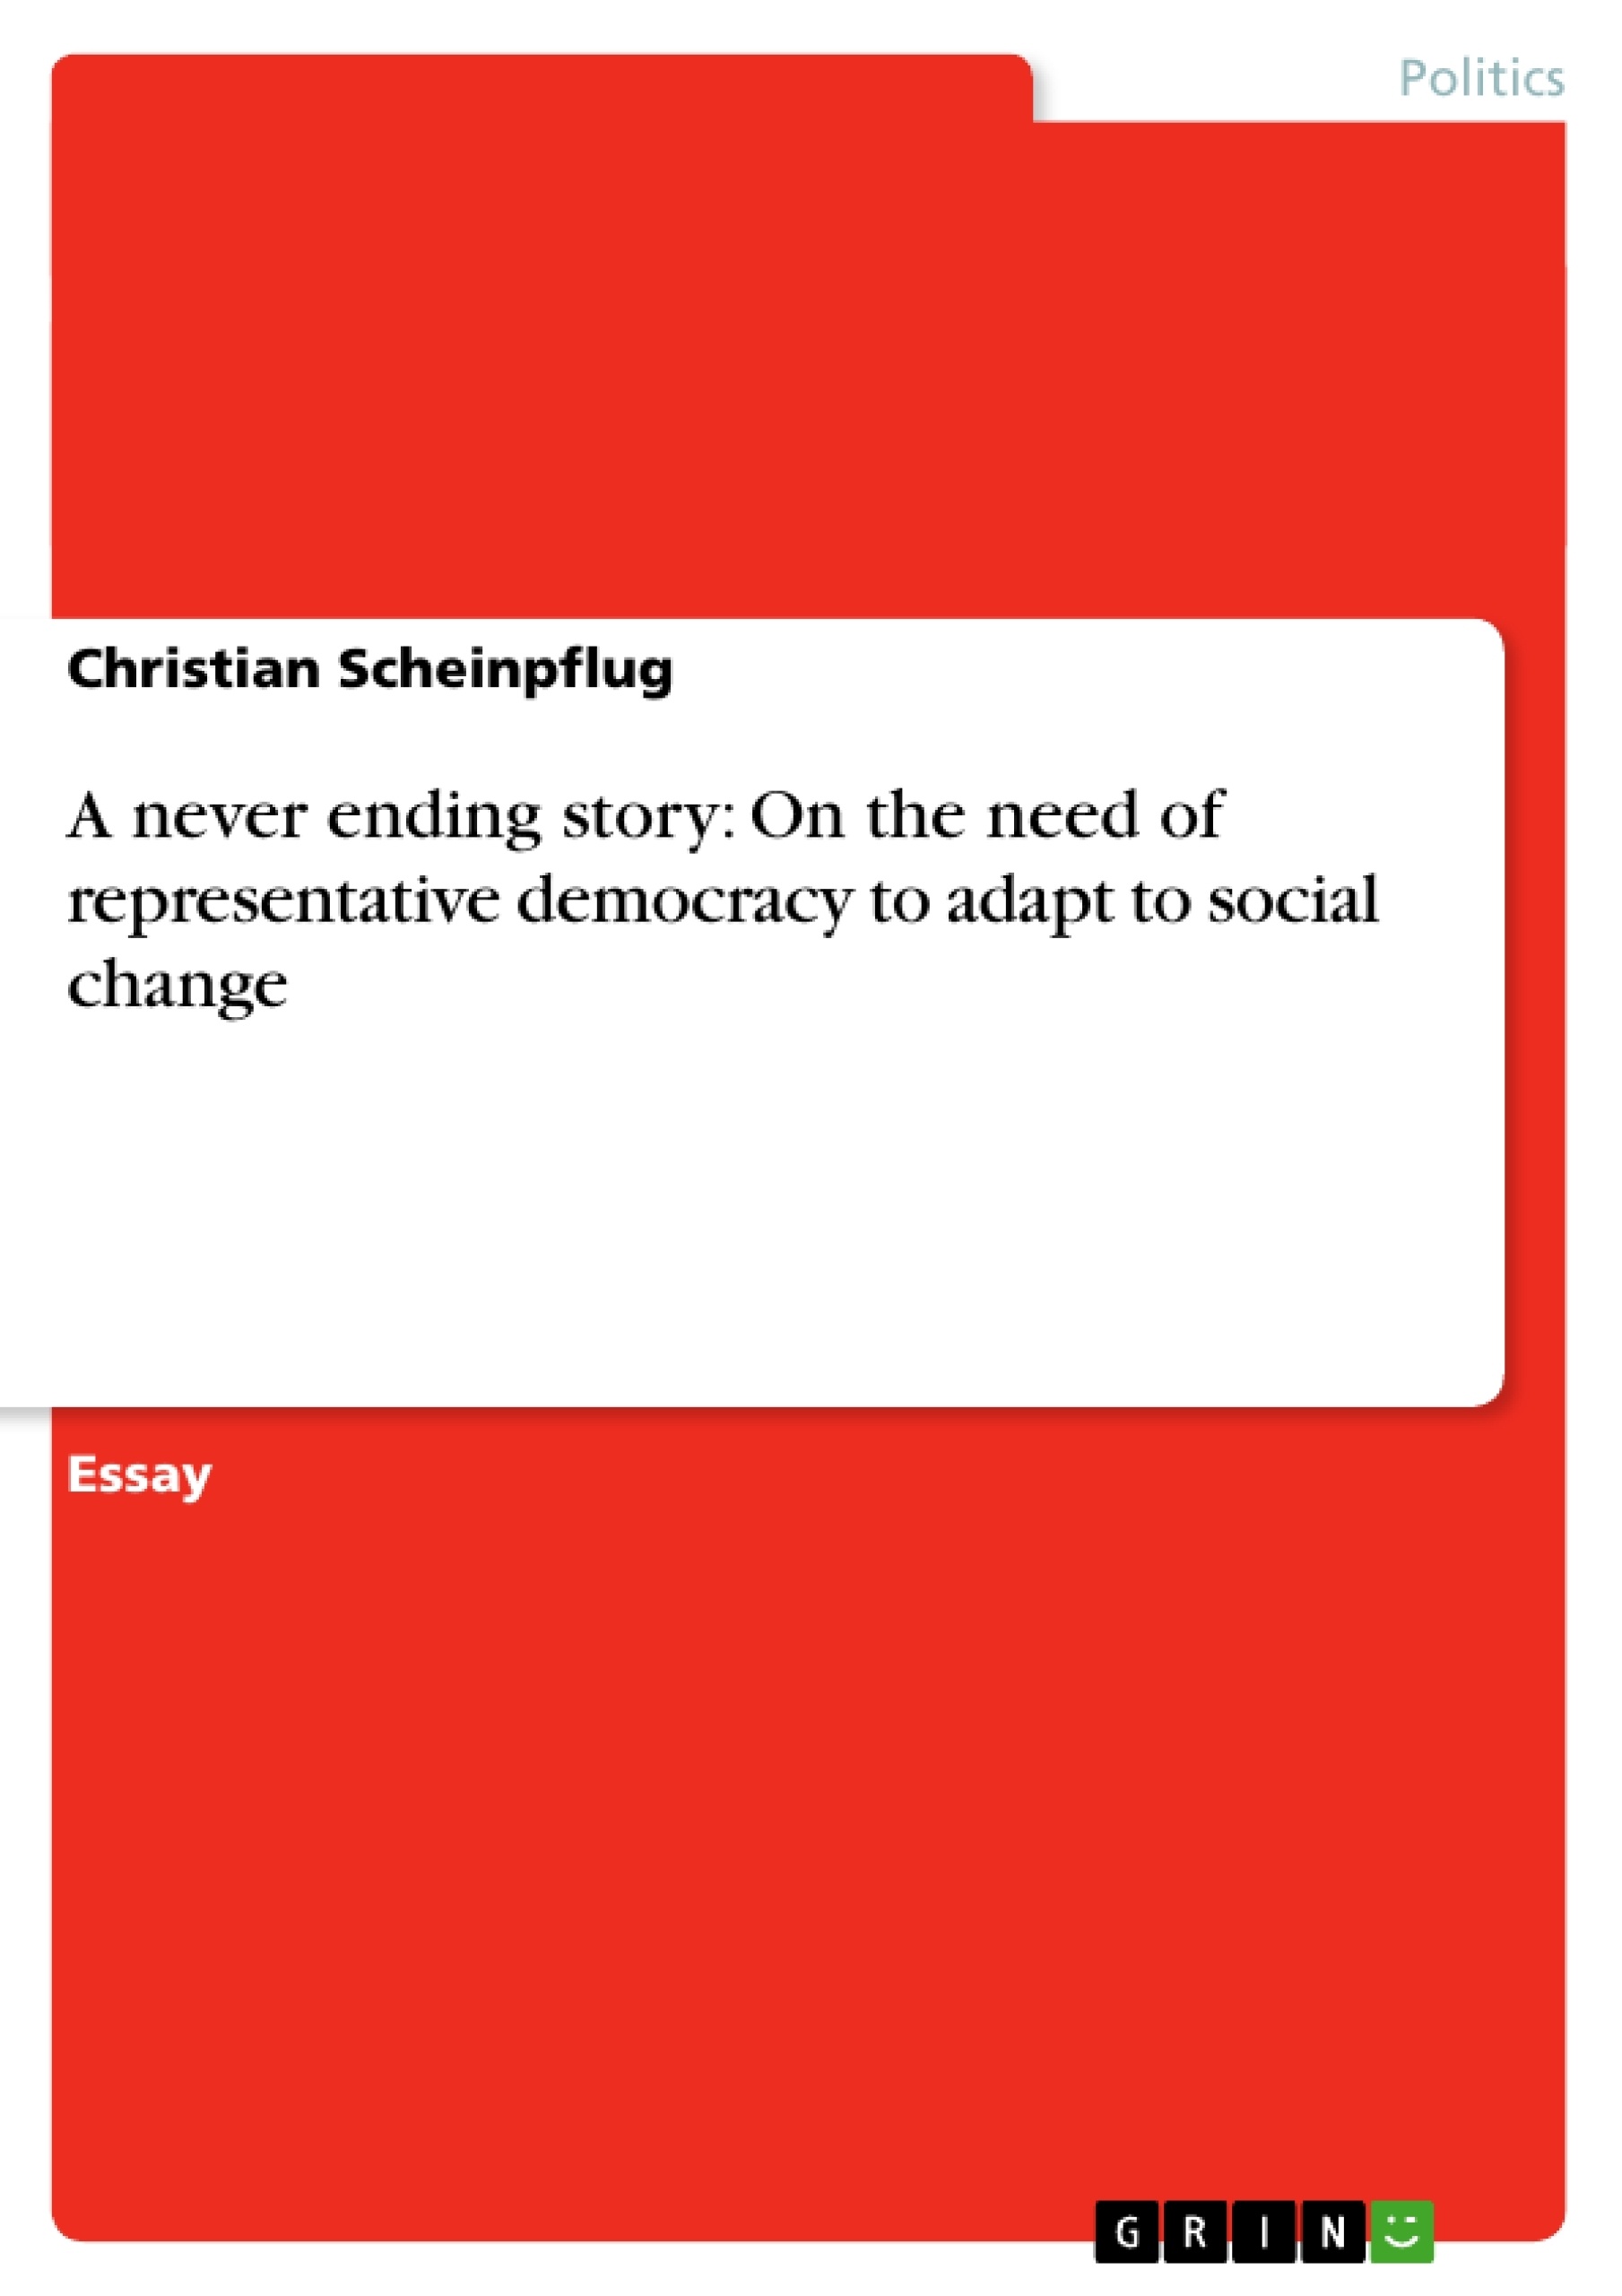 Title: A never ending story: On the need of representative democracy to adapt to social change